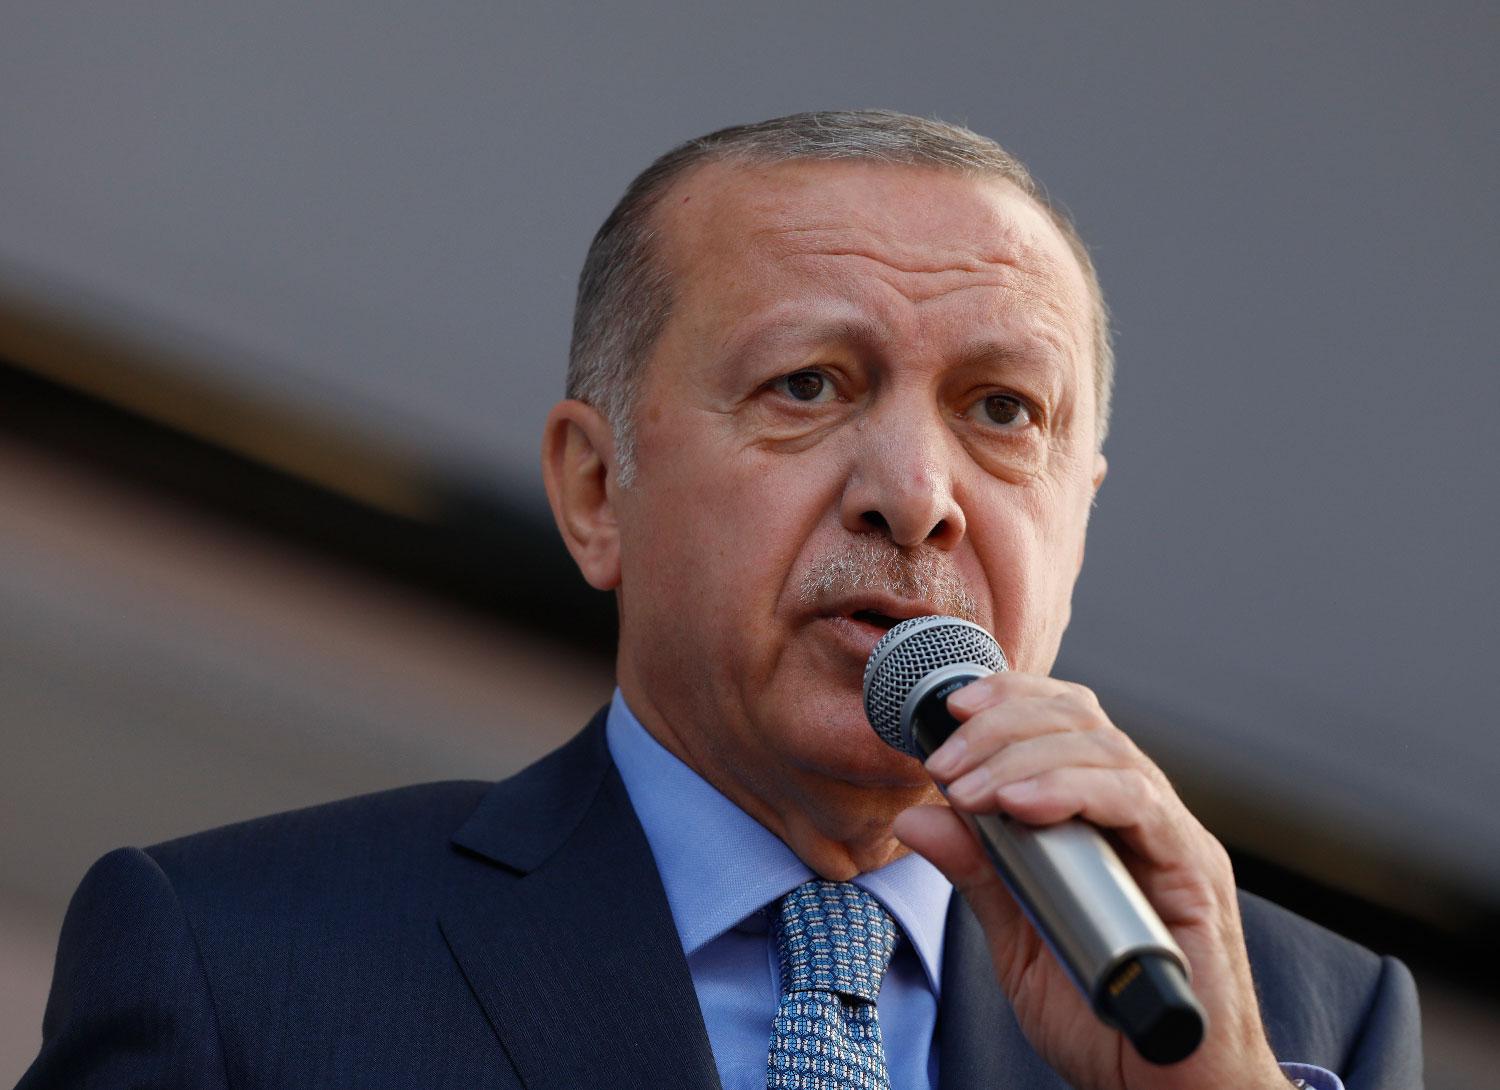 In this Thursday, March 14, 2019 photo, Turkey's President Recep Tayyip Erdogan addresses the supporters of his ruling Justice and Development Party, AKP, during a rally in Ankara, Turkey.